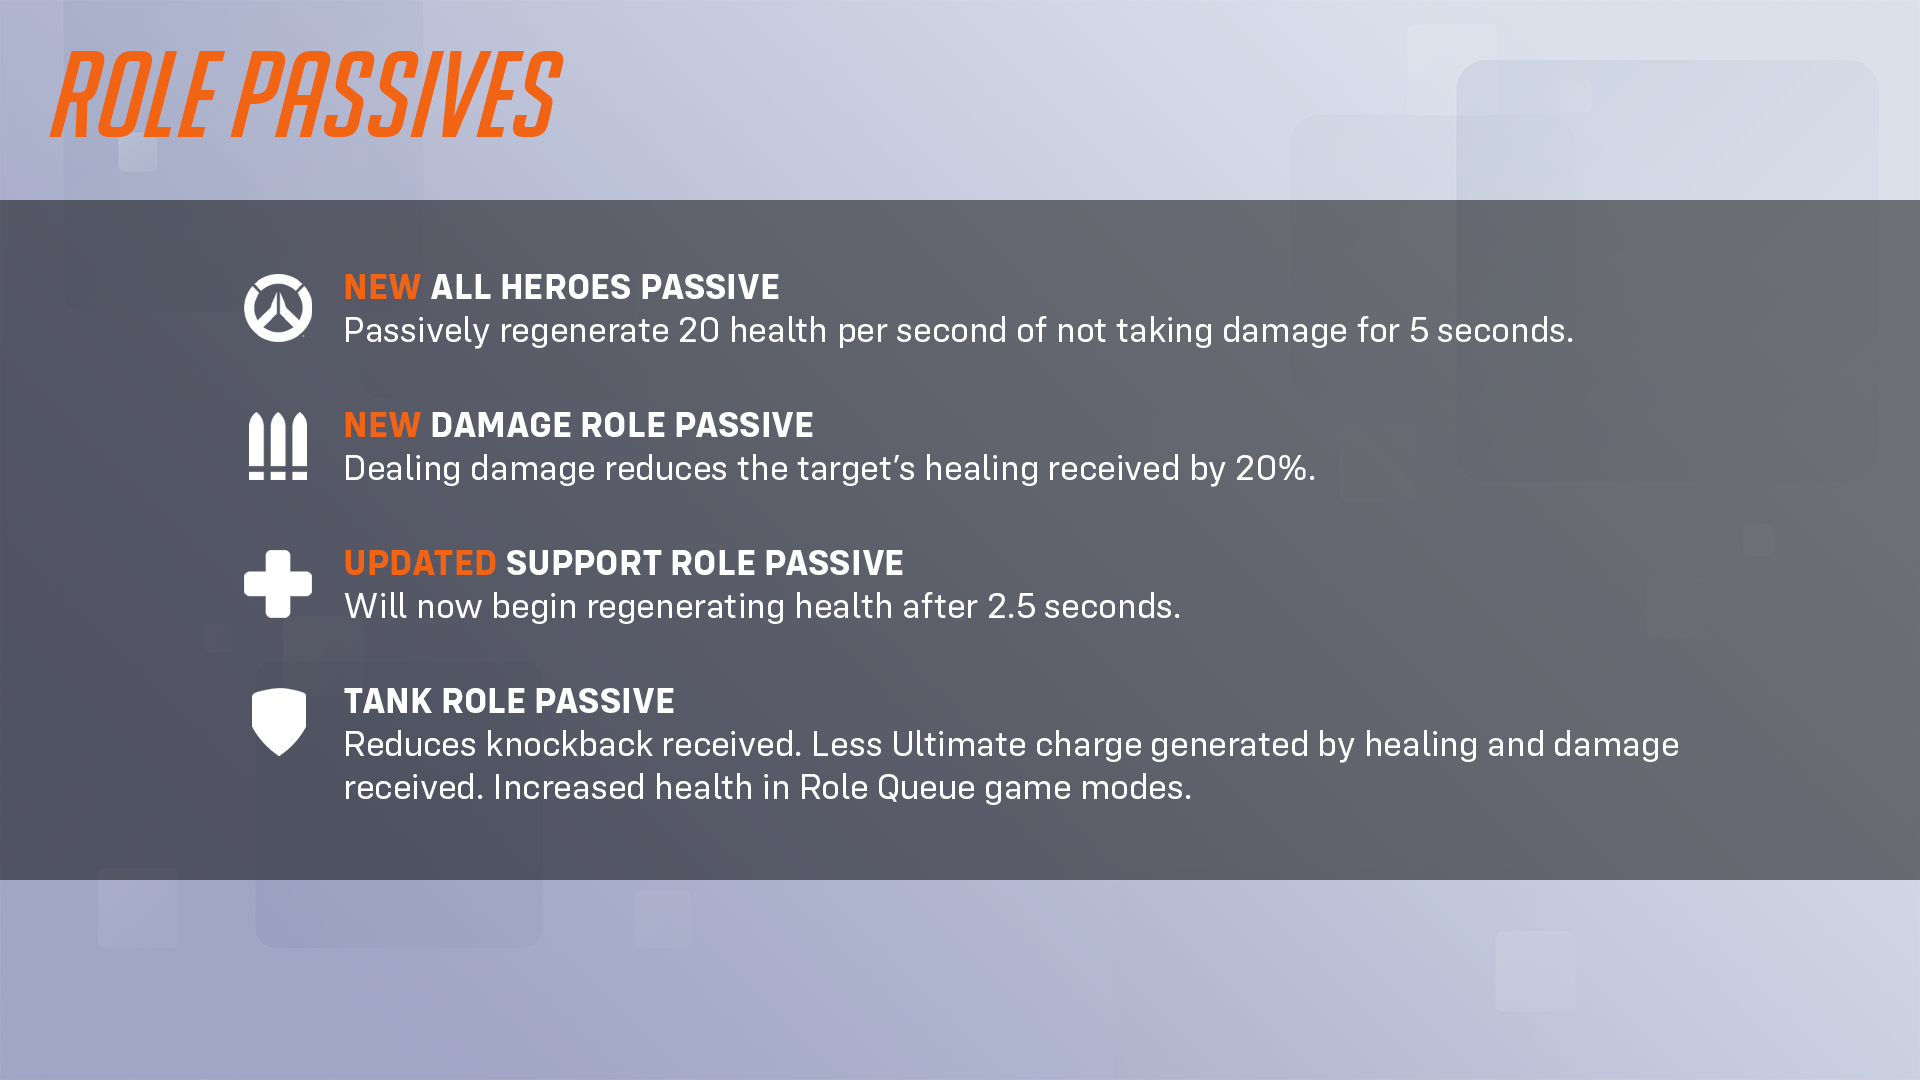 Overwatch 2 infographic with details on season 9 changes to hero role passives